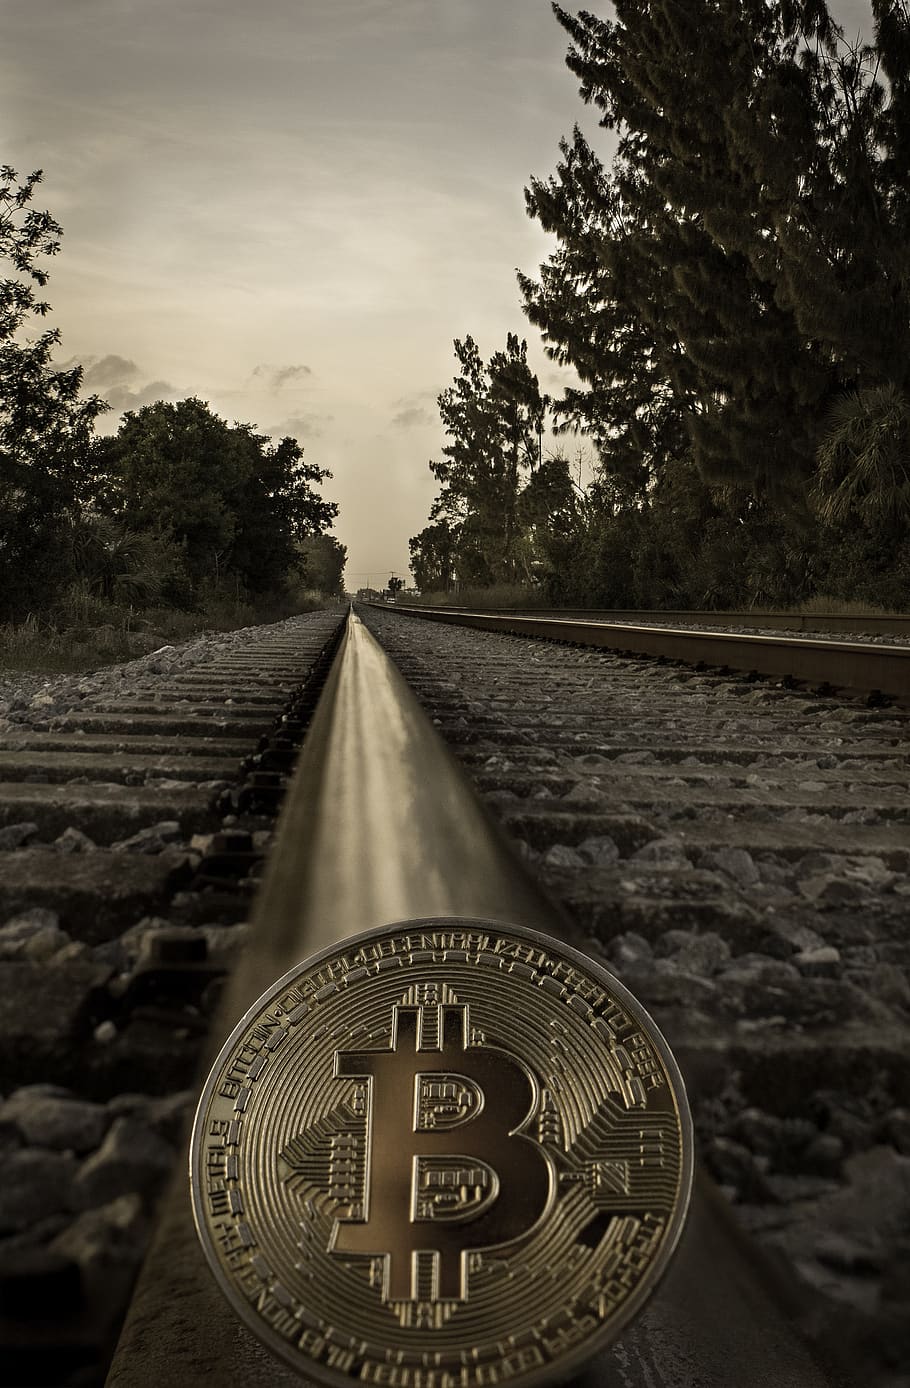 cryptocurrency, concept, rail tracks, bitcoin, blockchain, money, finance, business, cryptography, currency